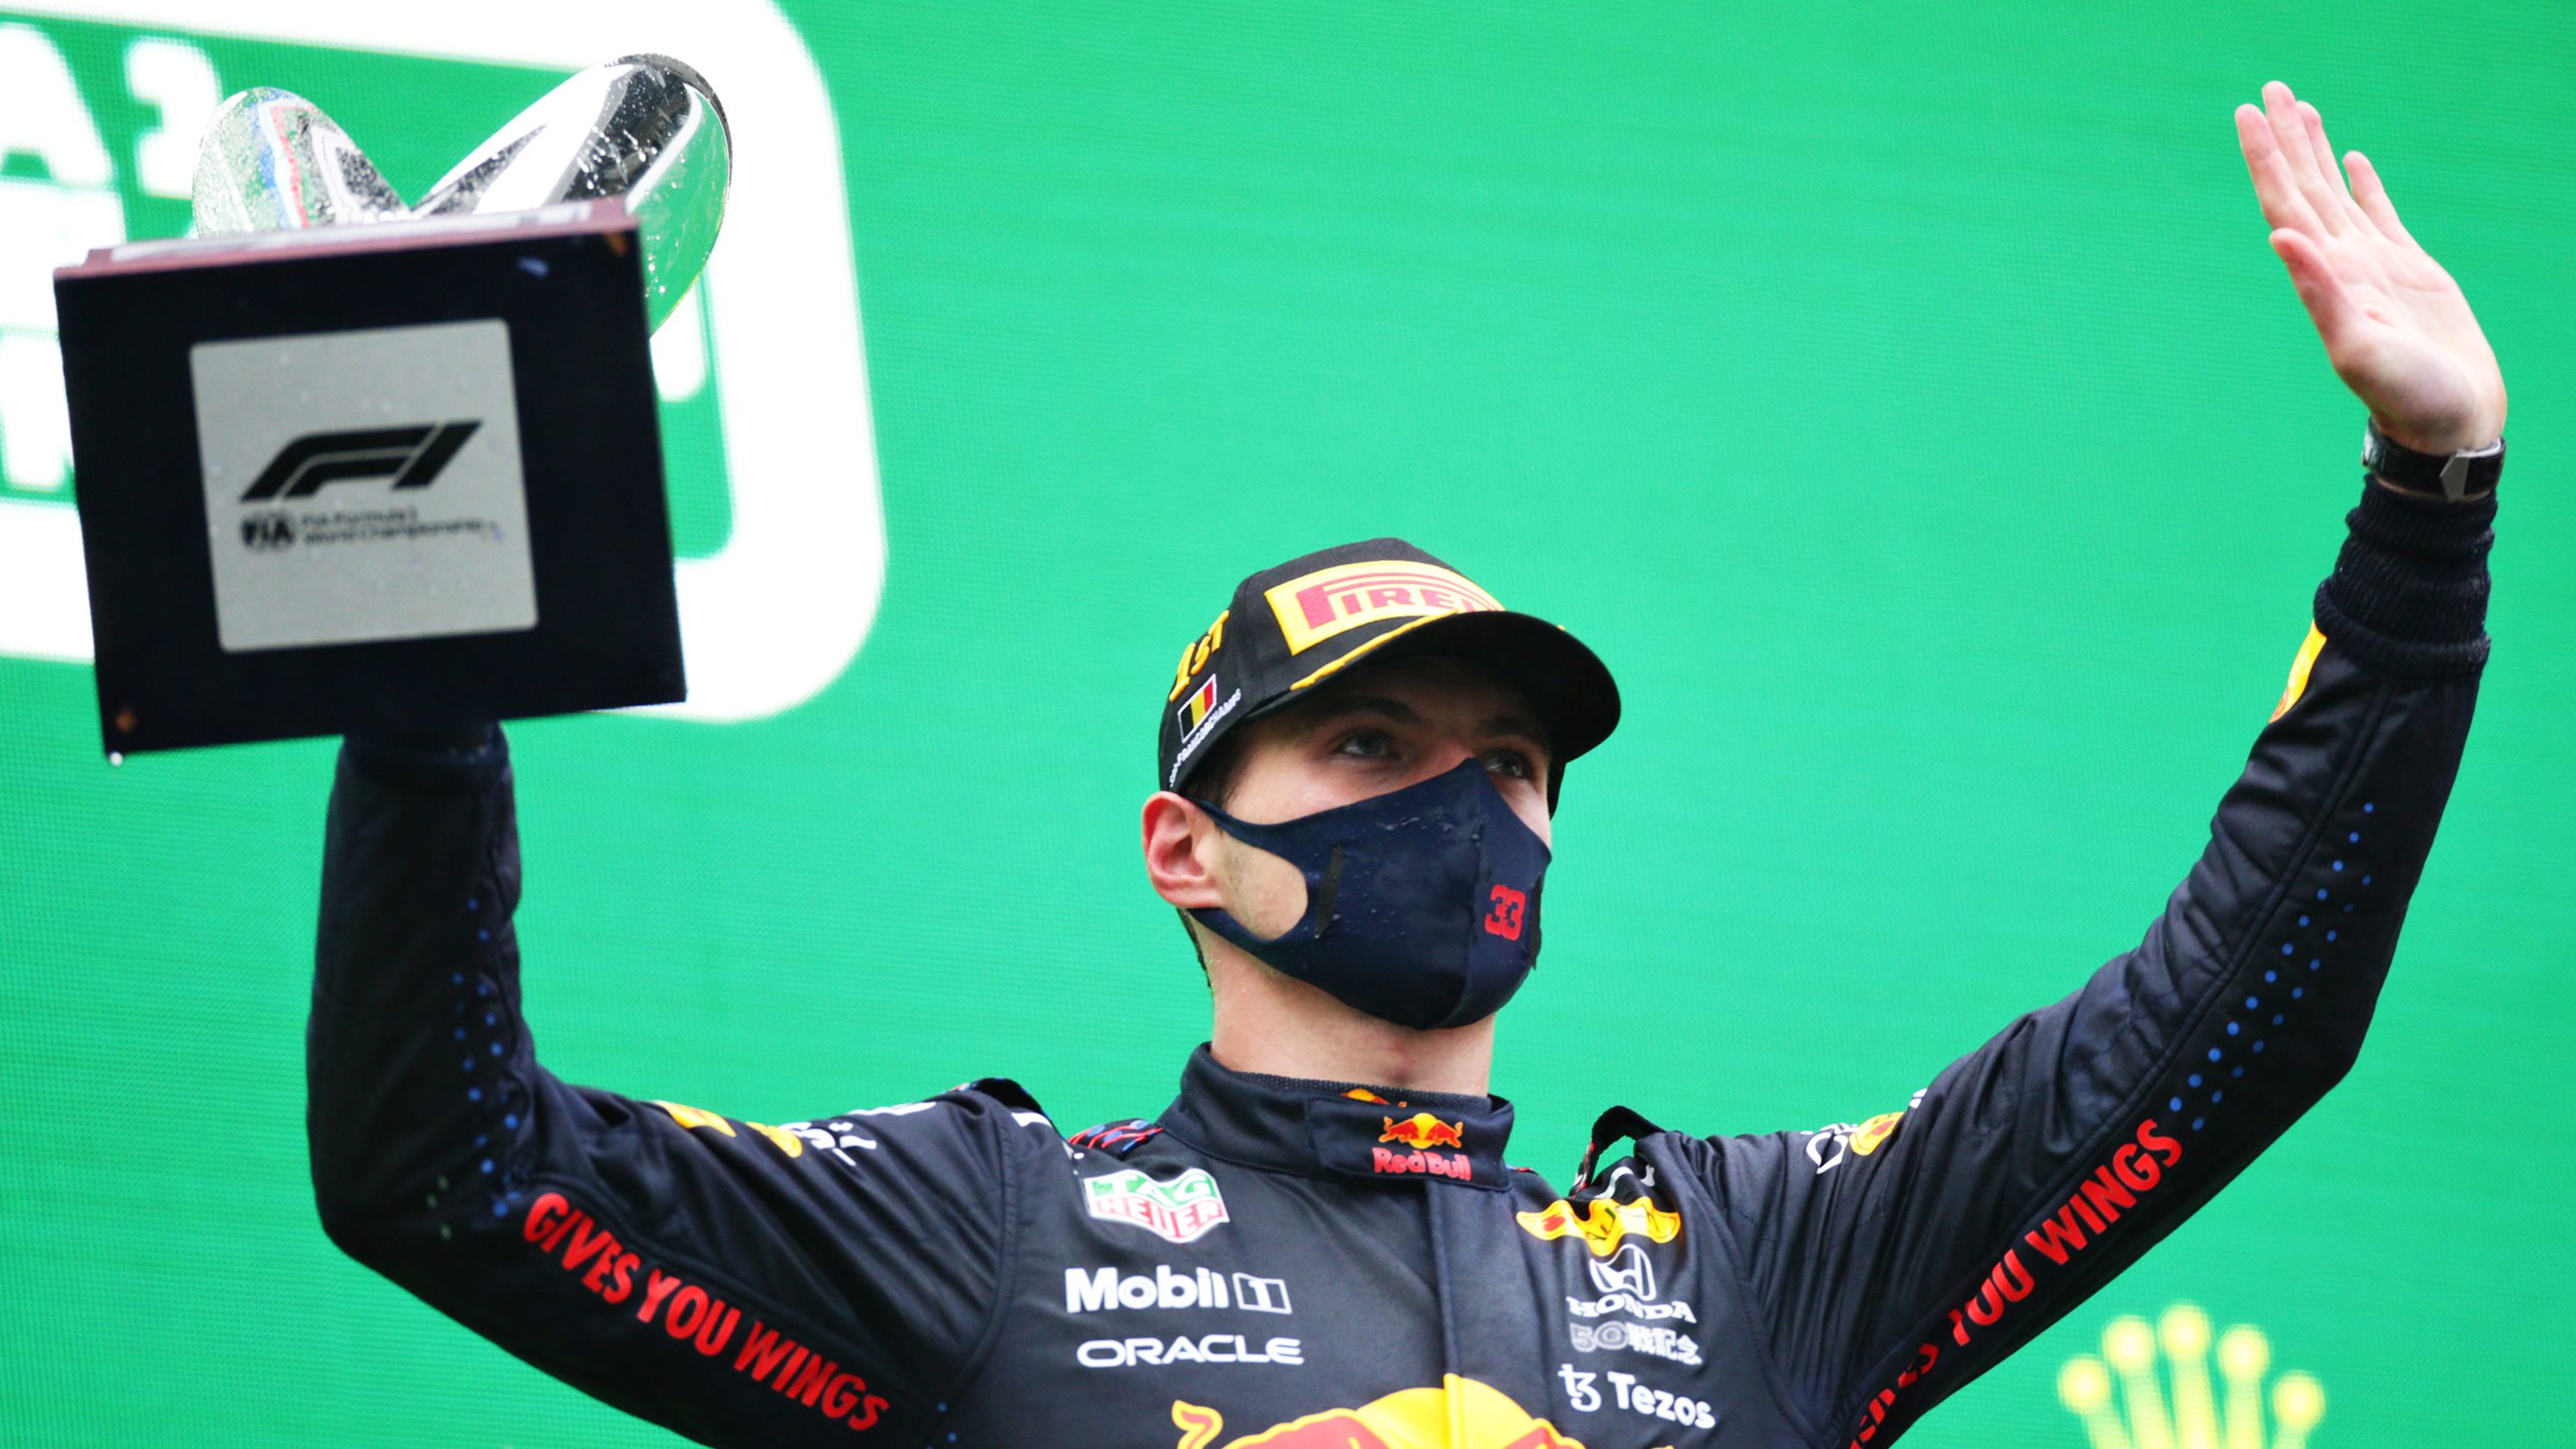 The Belgian Grand Prix lasted three minutes and 27 seconds due to weather delays, with Red Bull's Max Verstappen being crowned the winner -- a result effectively decided in Saturday's qualifying.